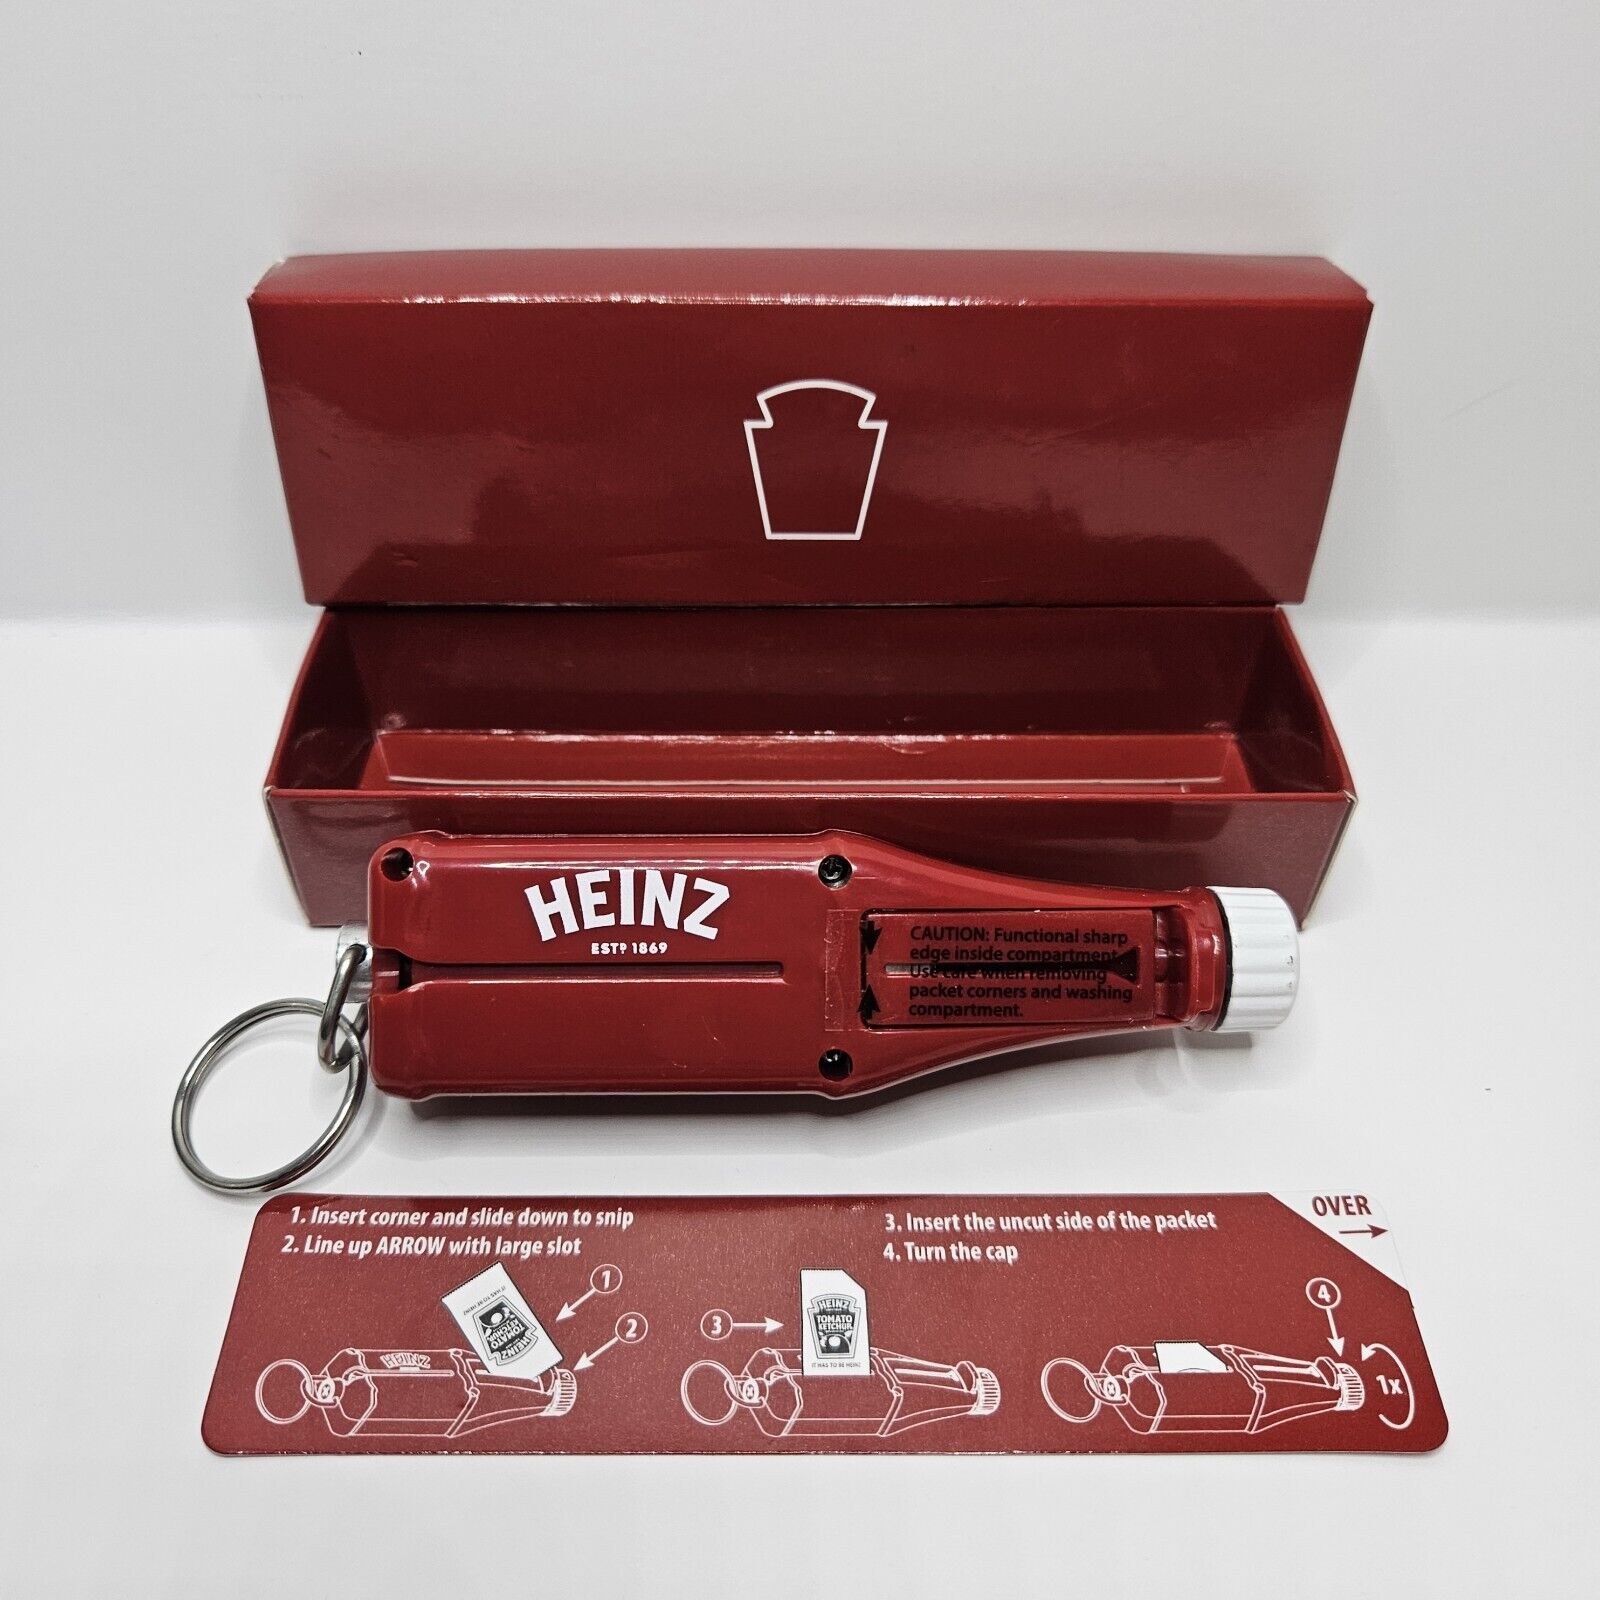 Heinz Ketchup Packet Roller Keychain ZAGWEAR - NEW OPEN BOX CONDITION 